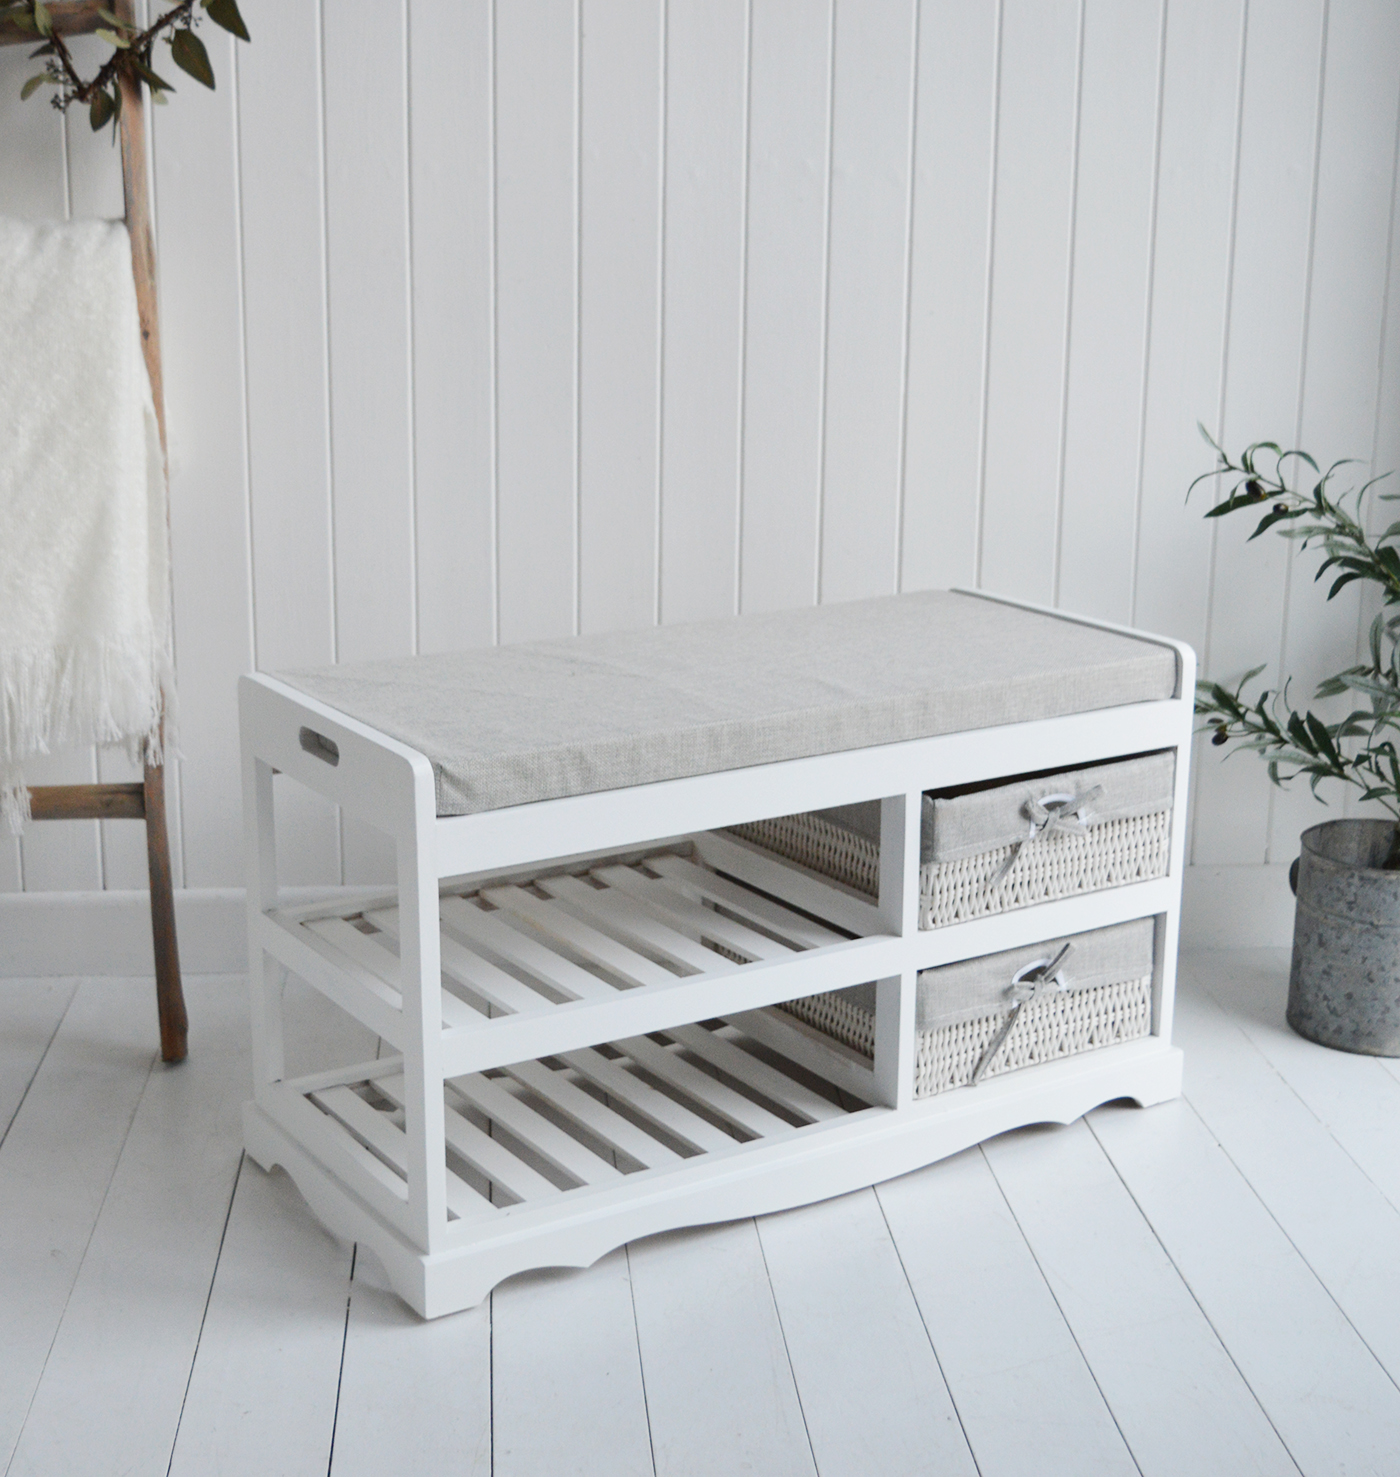 Cape Cod white bedroom bench with shelves, cushion and baskets- New England Modern Farmhouse and Coastal Furniture